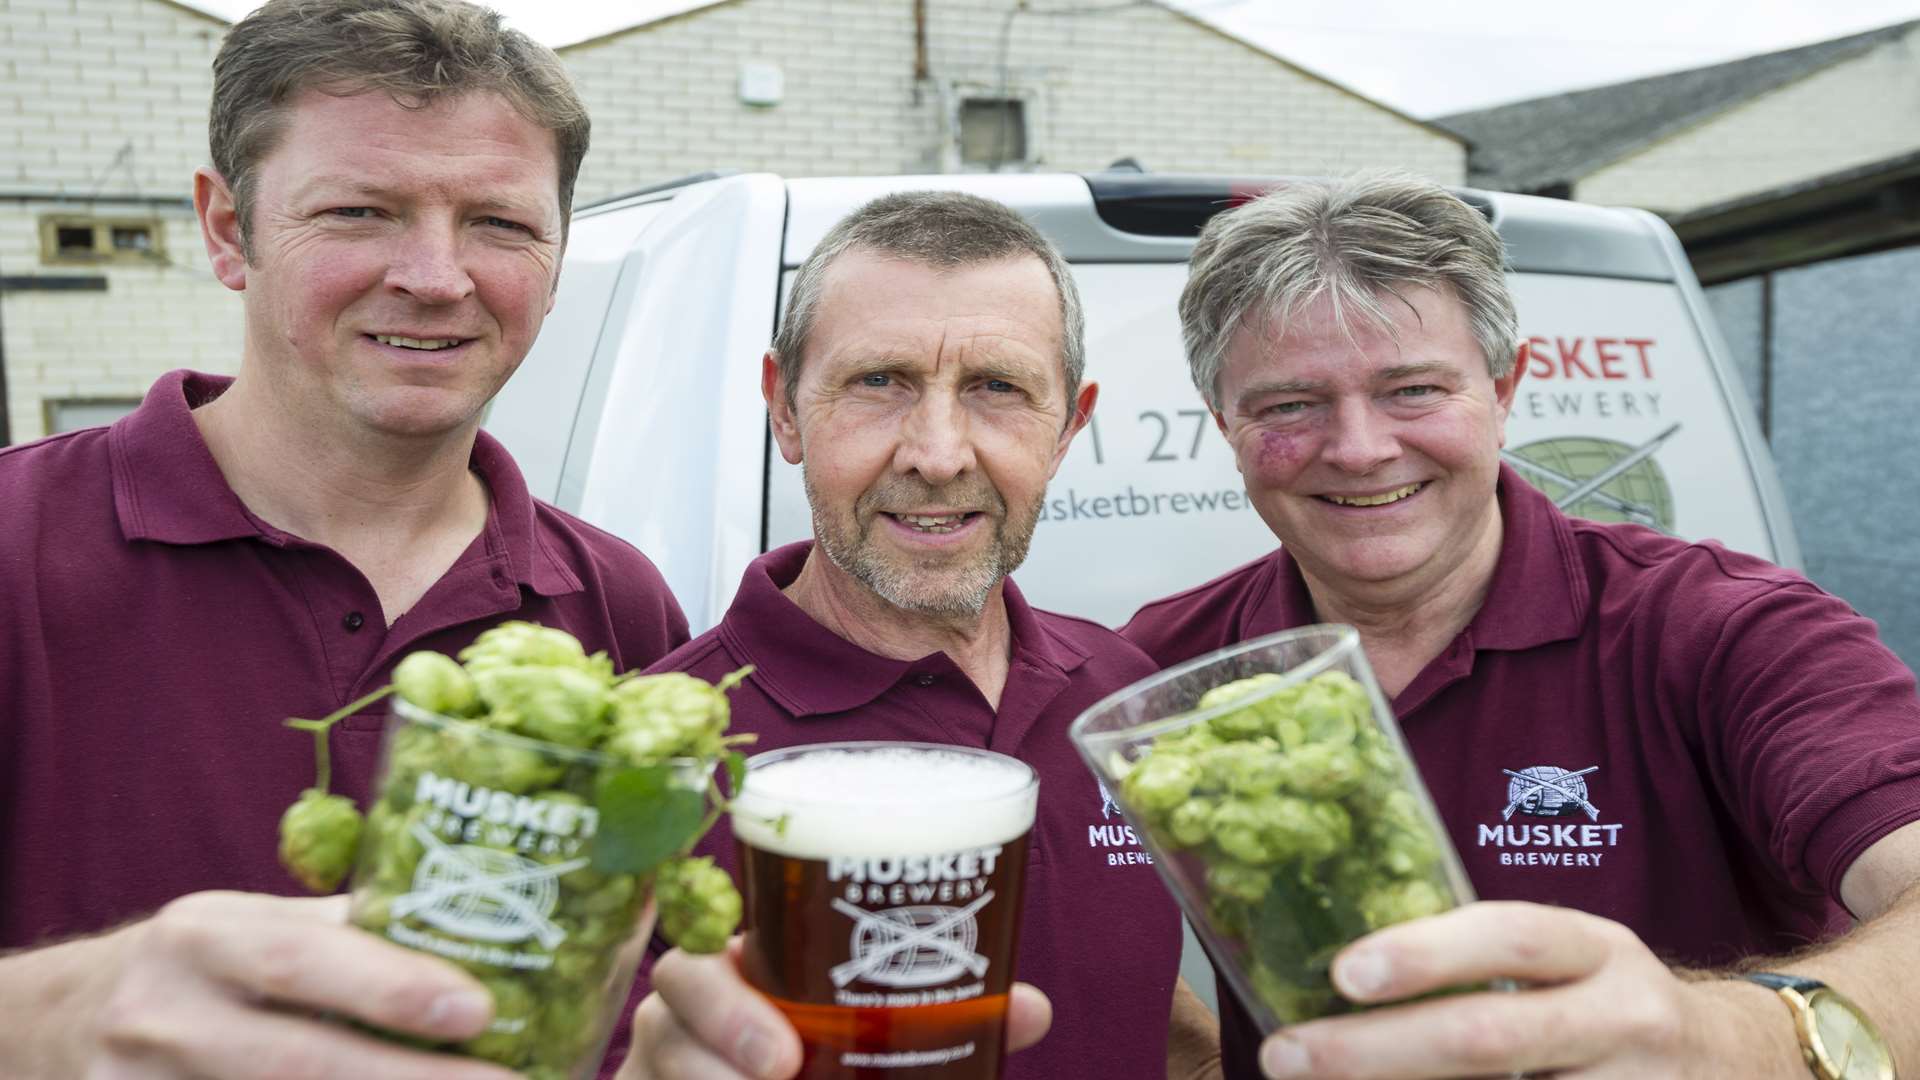 Mark Stroud, Nigel Deas and Tony Williams from the Musket Brewery raise a glass to the Kent Green Hop Festival.